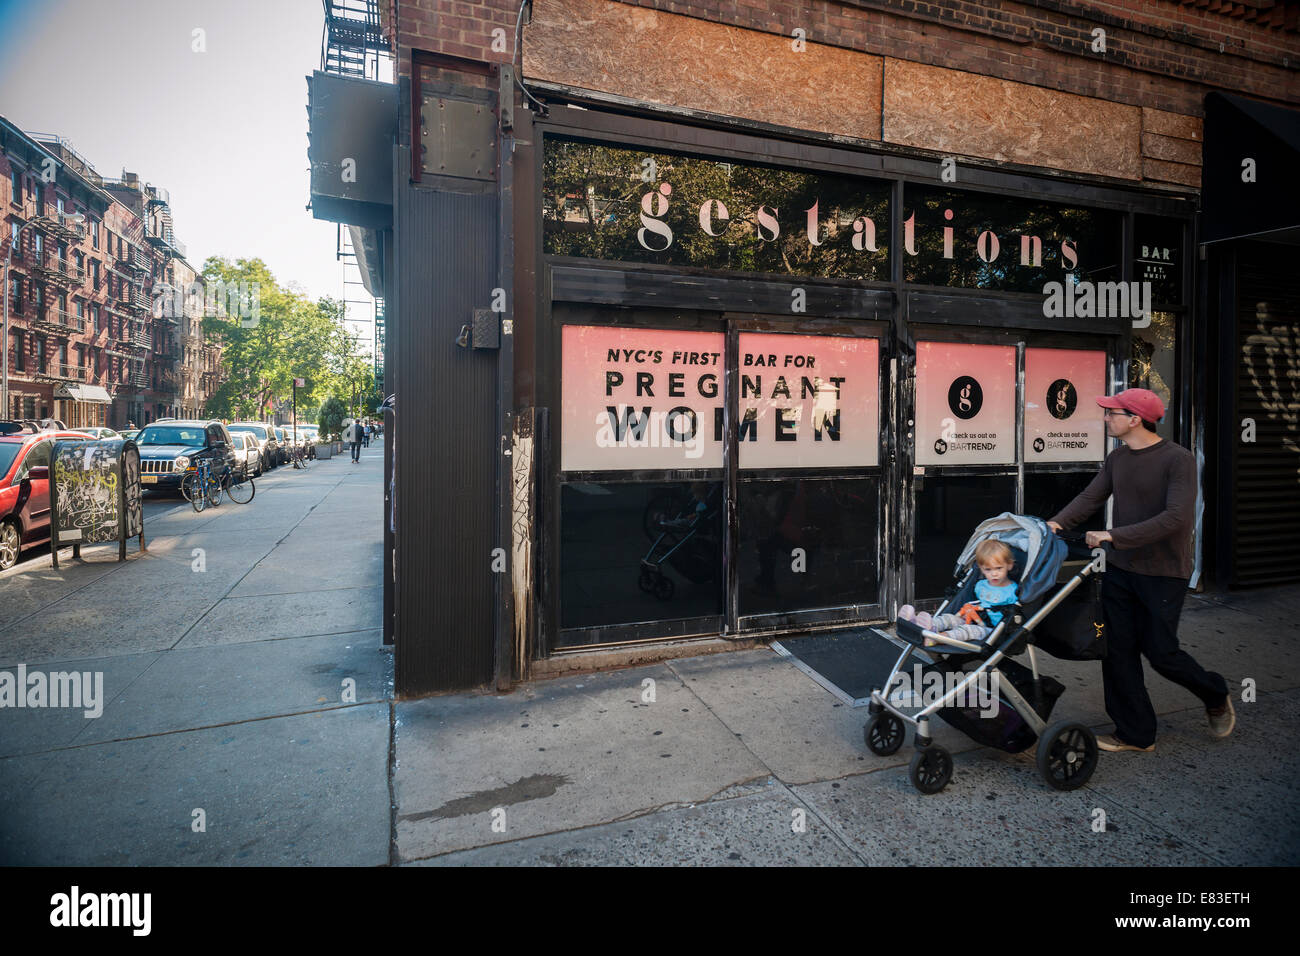 Gestations, NYC's first bar for pregnant women Stock Photo